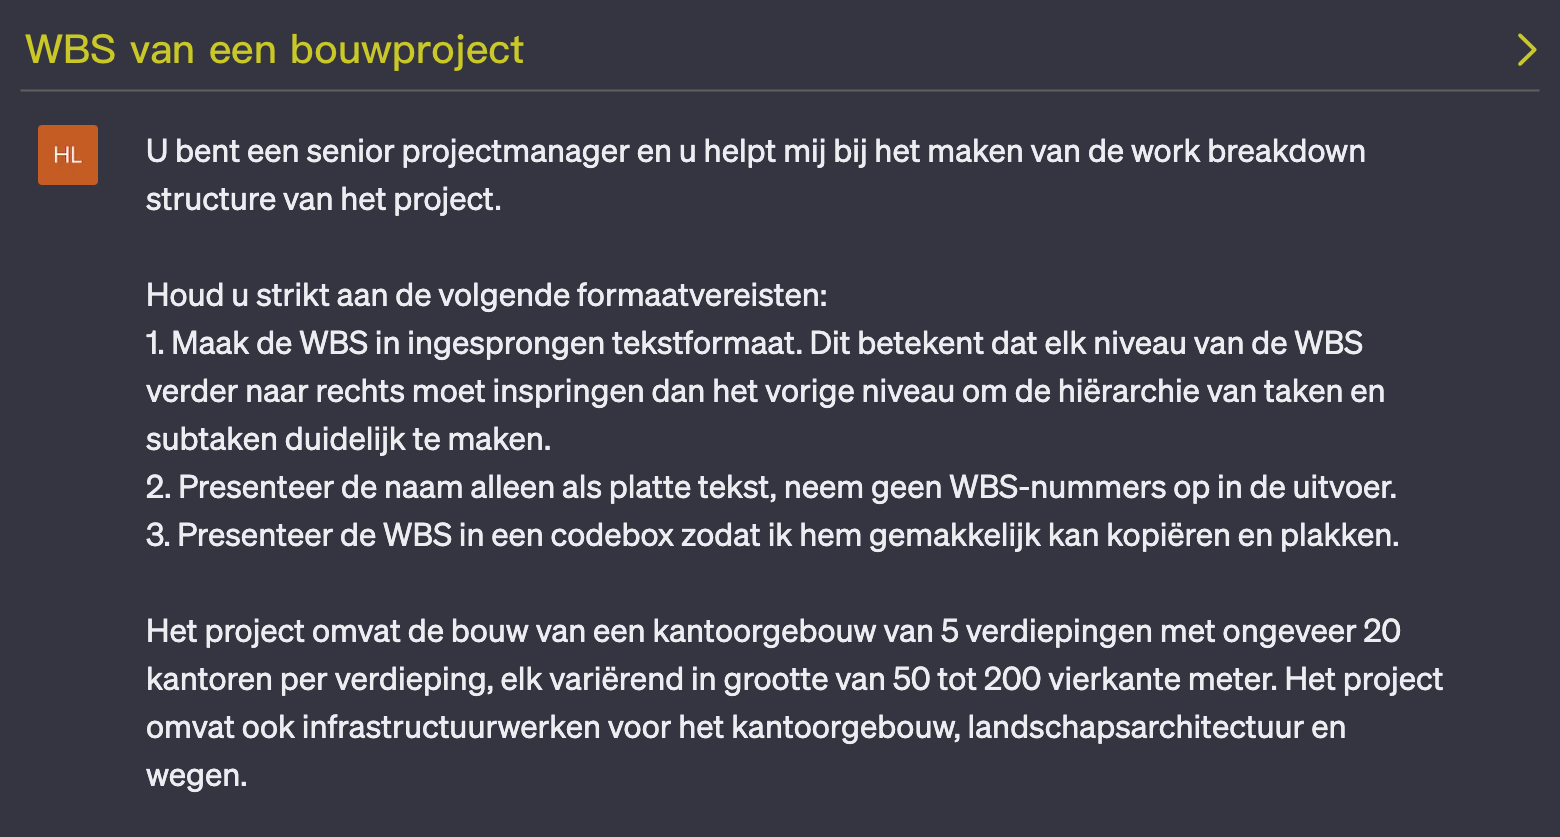 Bouwproject WBS